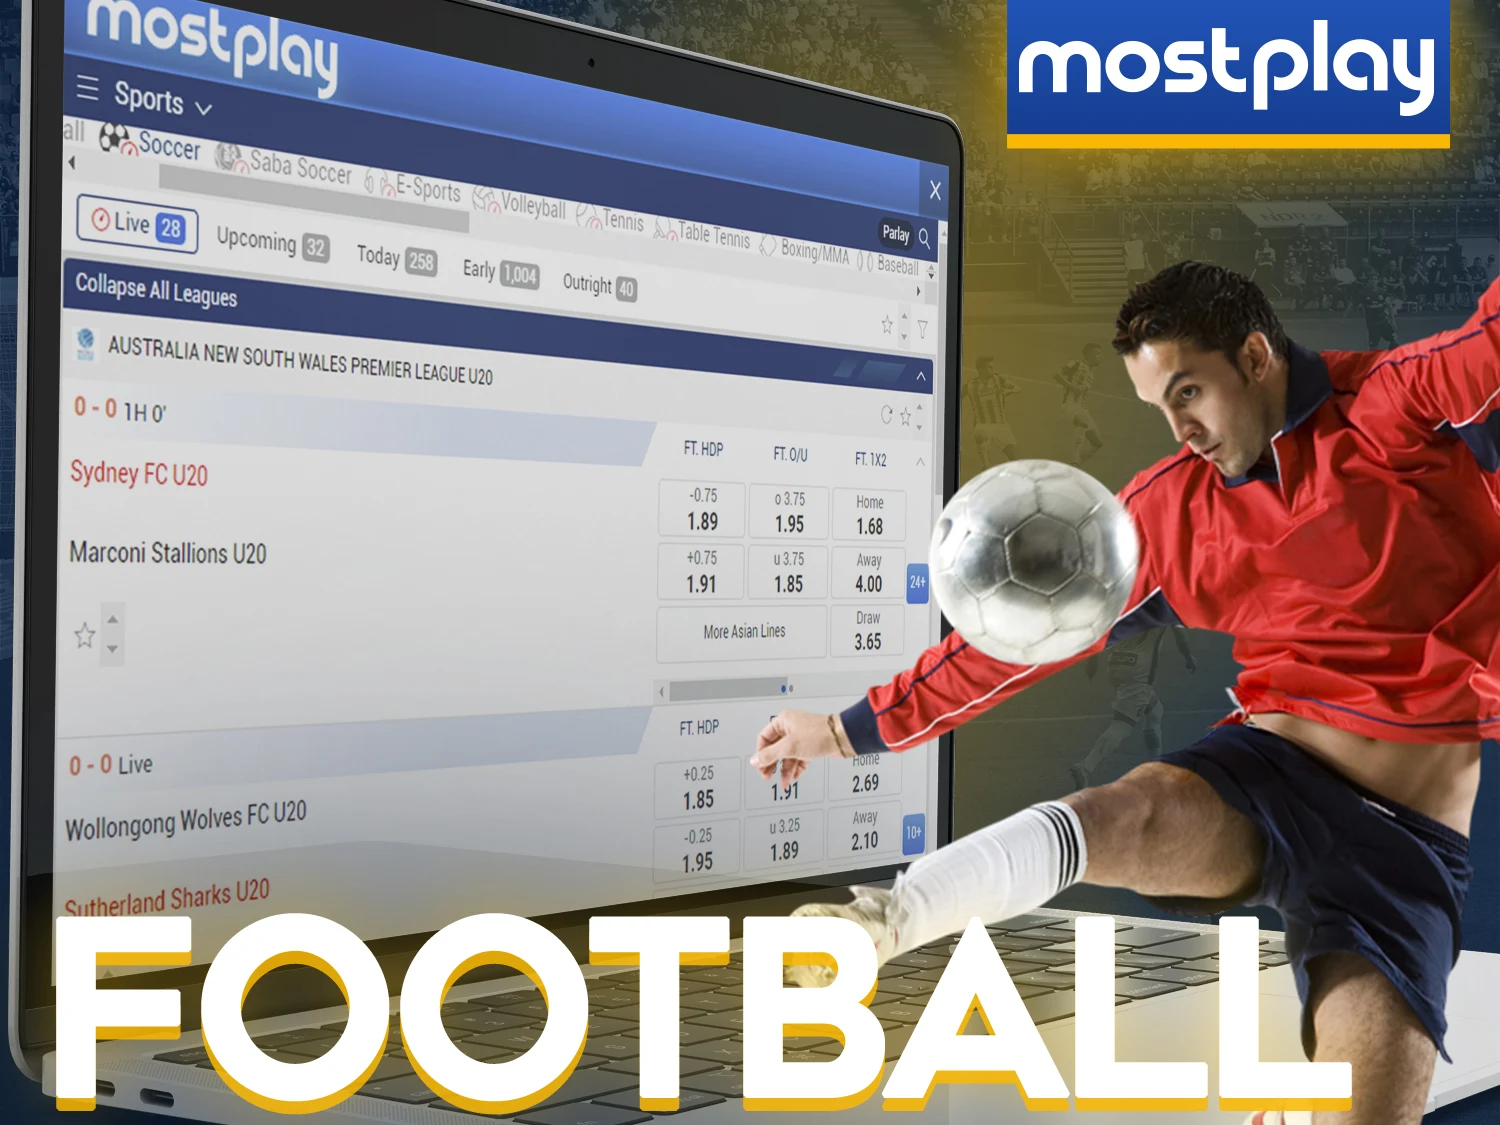 Bet on your favorite football teams at Mostplay.